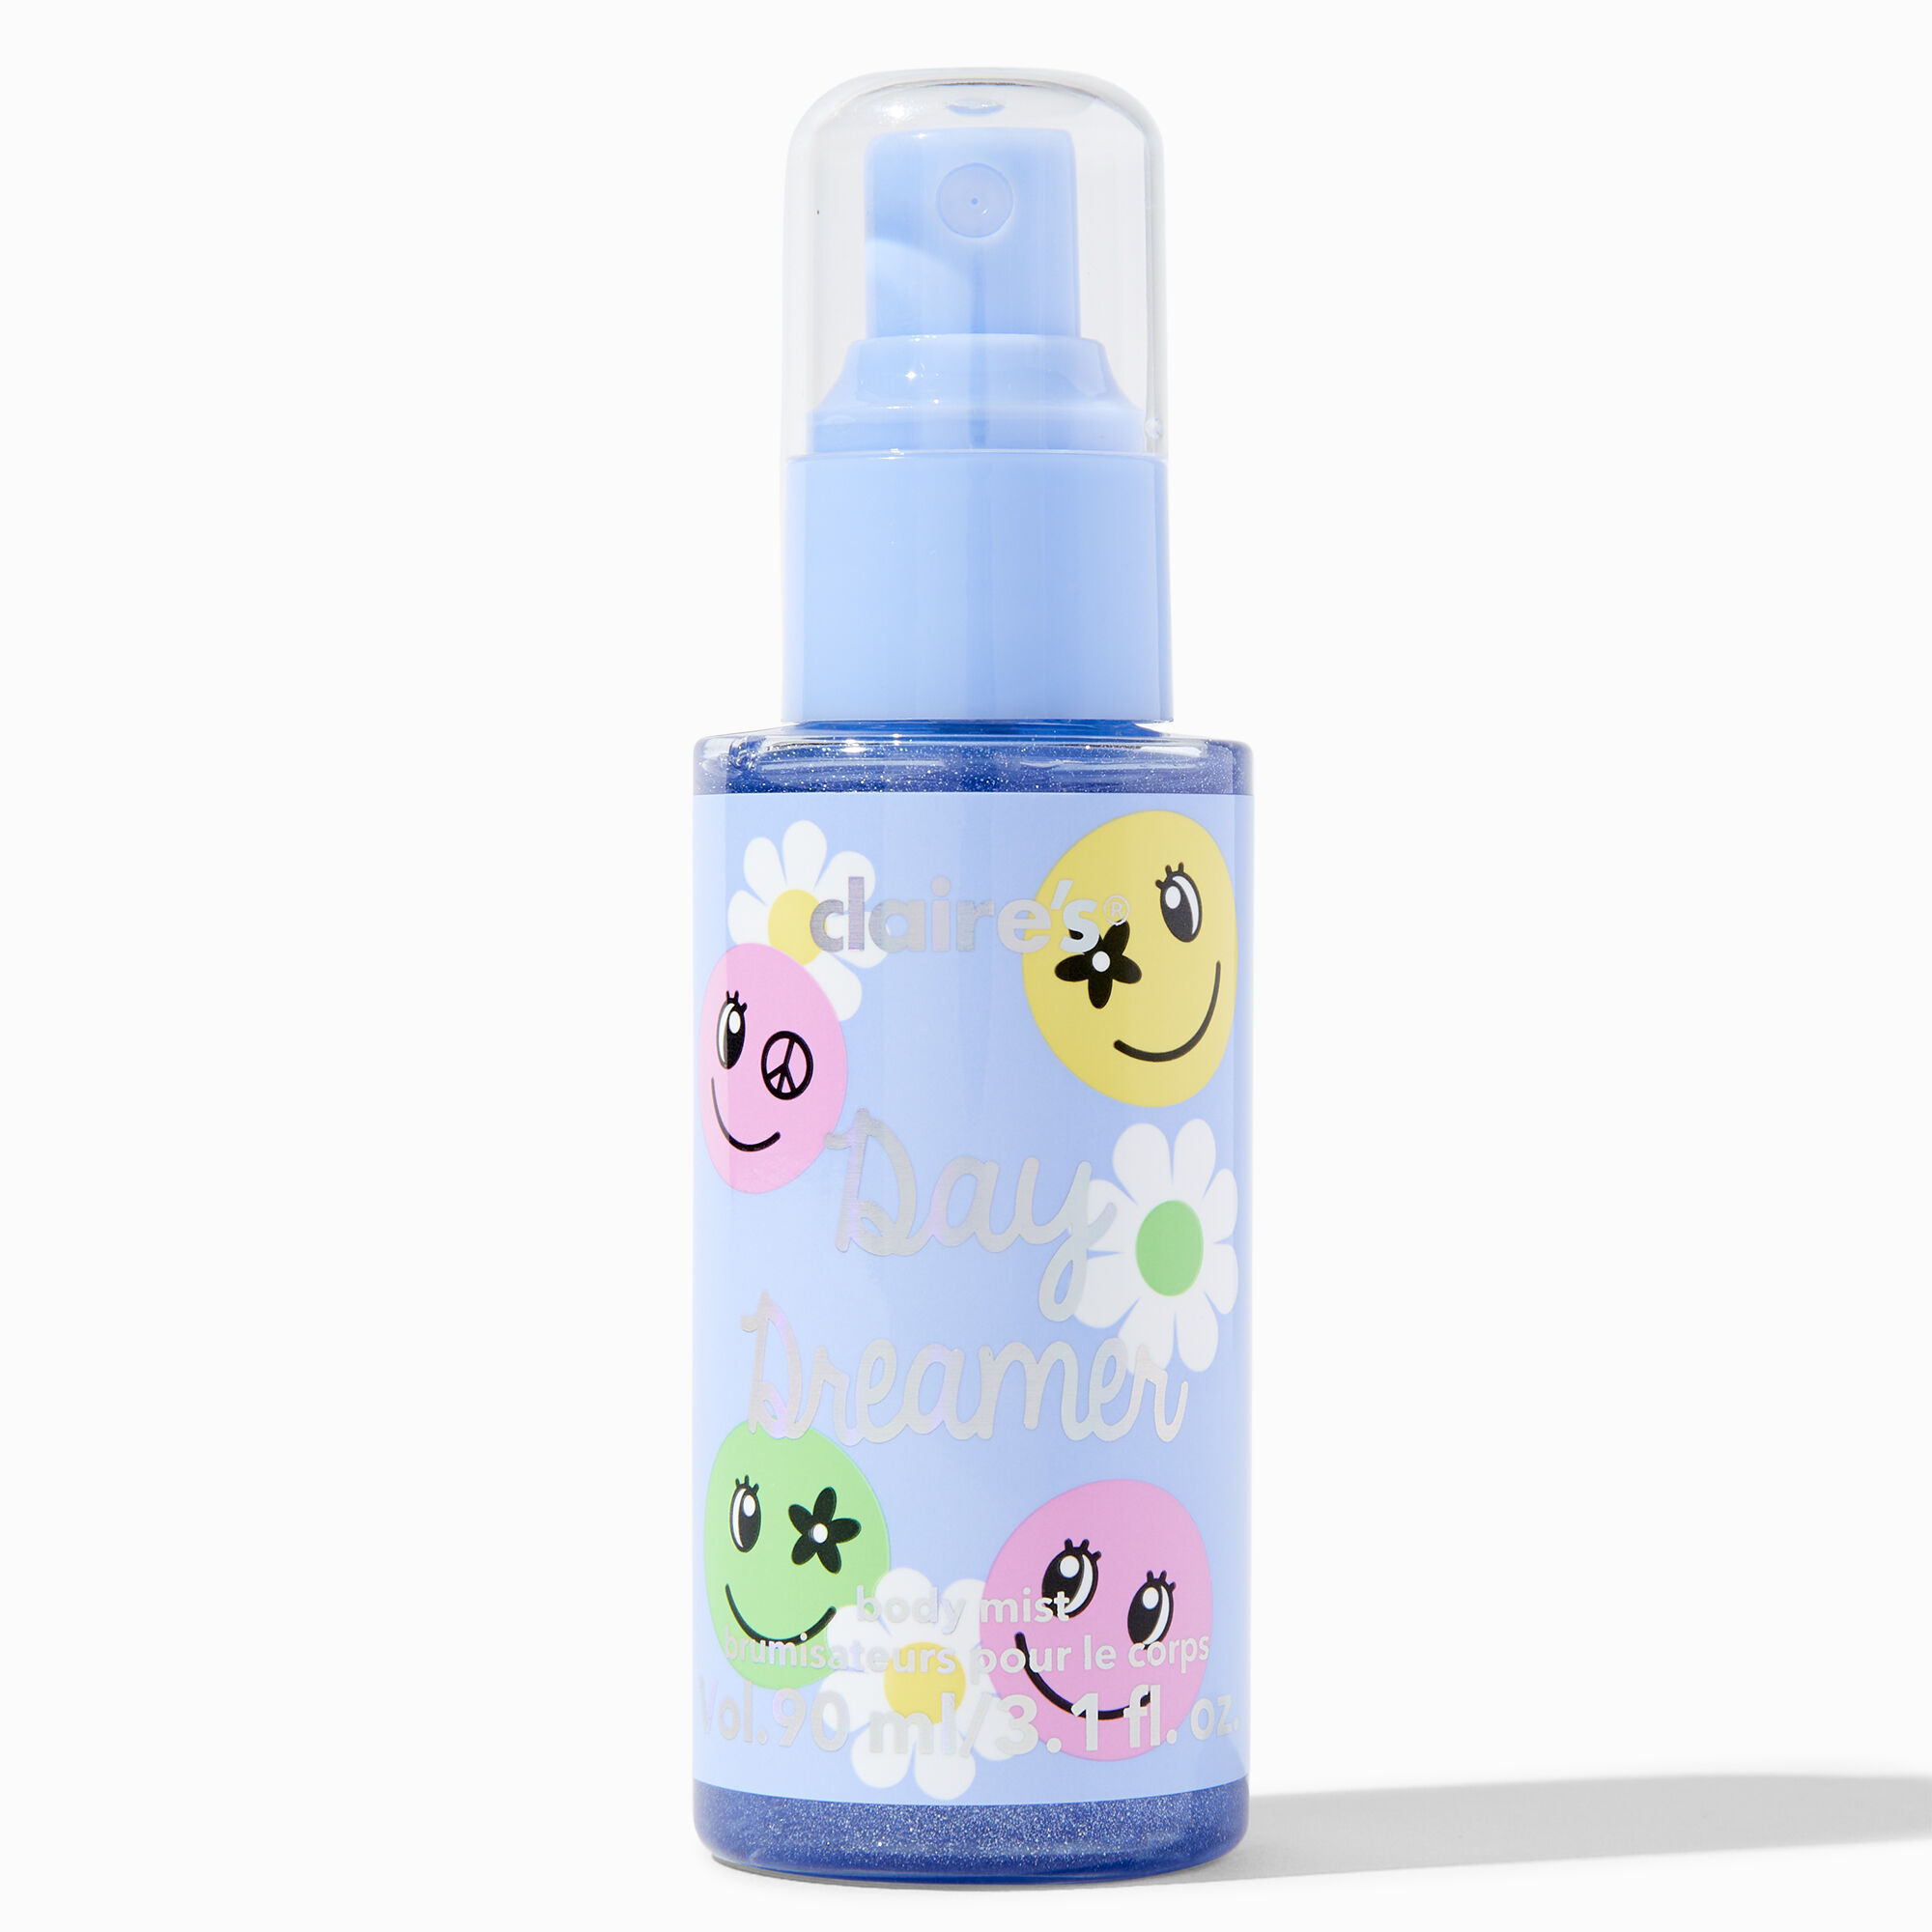 View Claires Day Dreamer Body Spray information